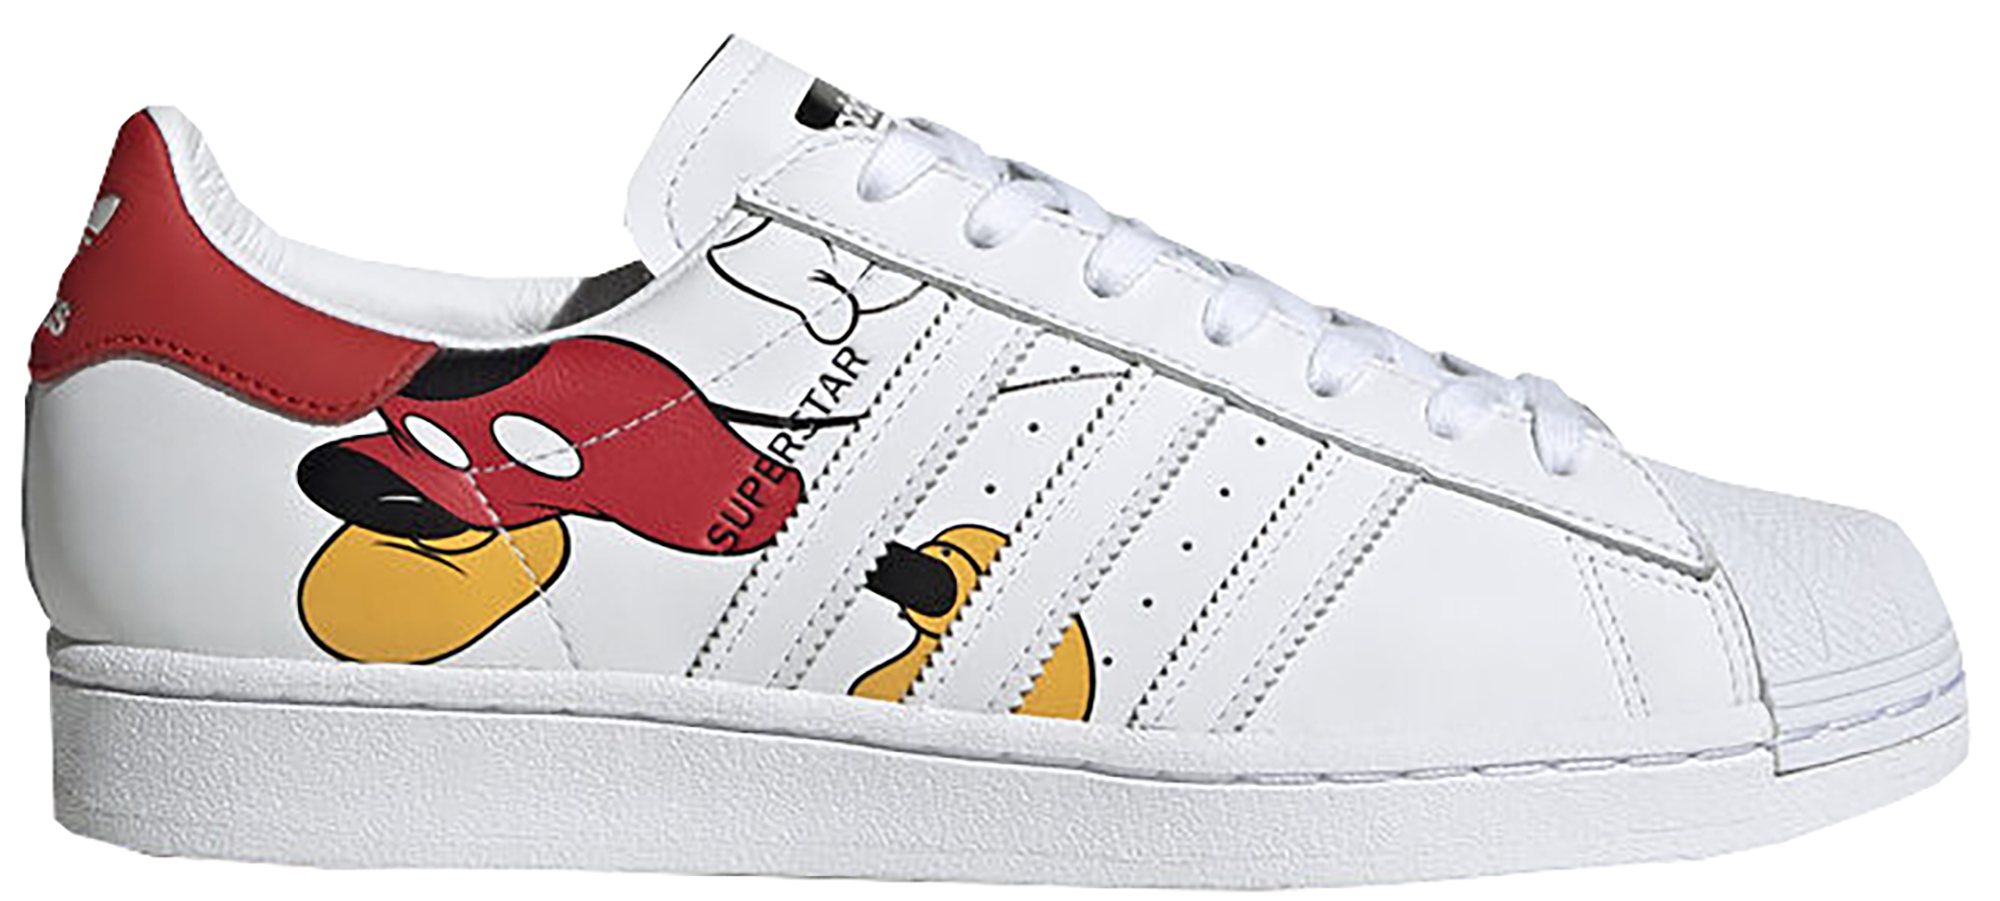 Adidas x Disney Mickey Mouse Superstar Men's Shoes, White, Size: 13